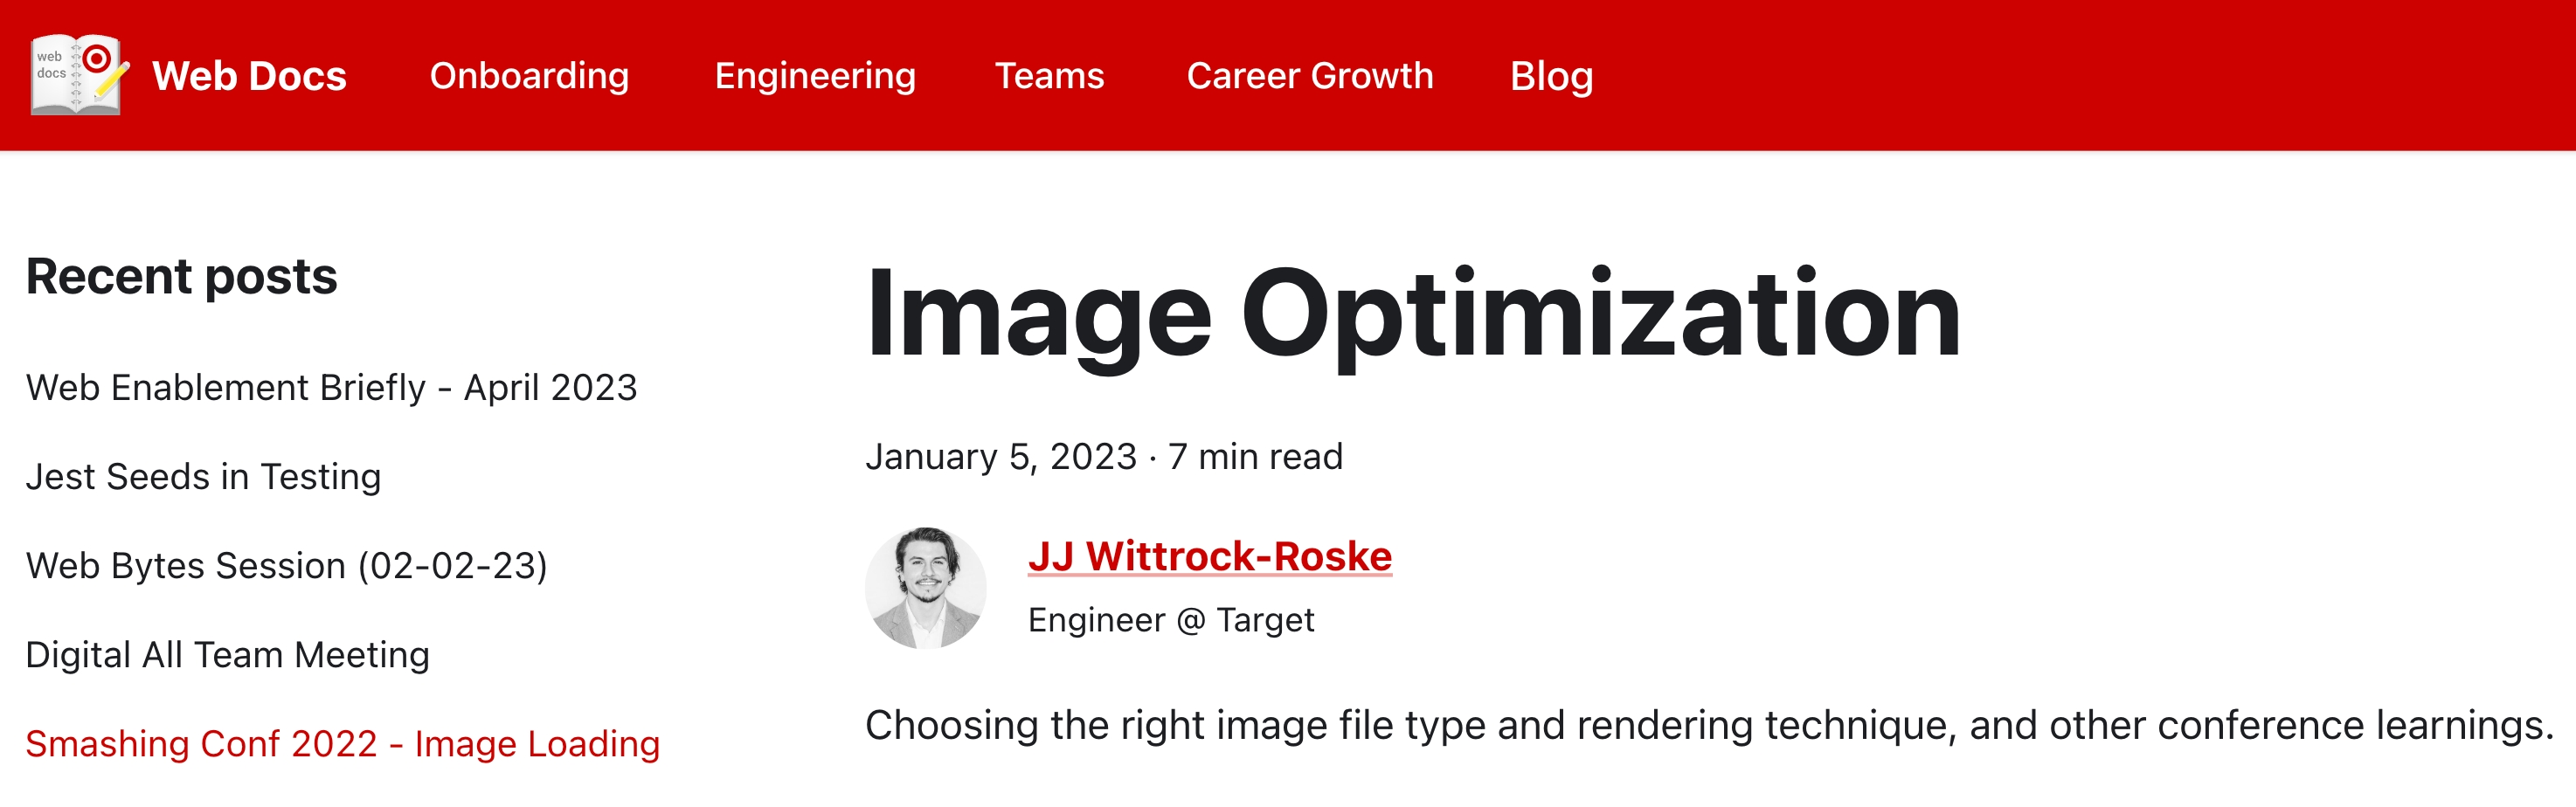 screenshot from Docusaurus that shows a post titled "Image Optimization" dated January 5, 2023 written by JJ Wittrock-Roske